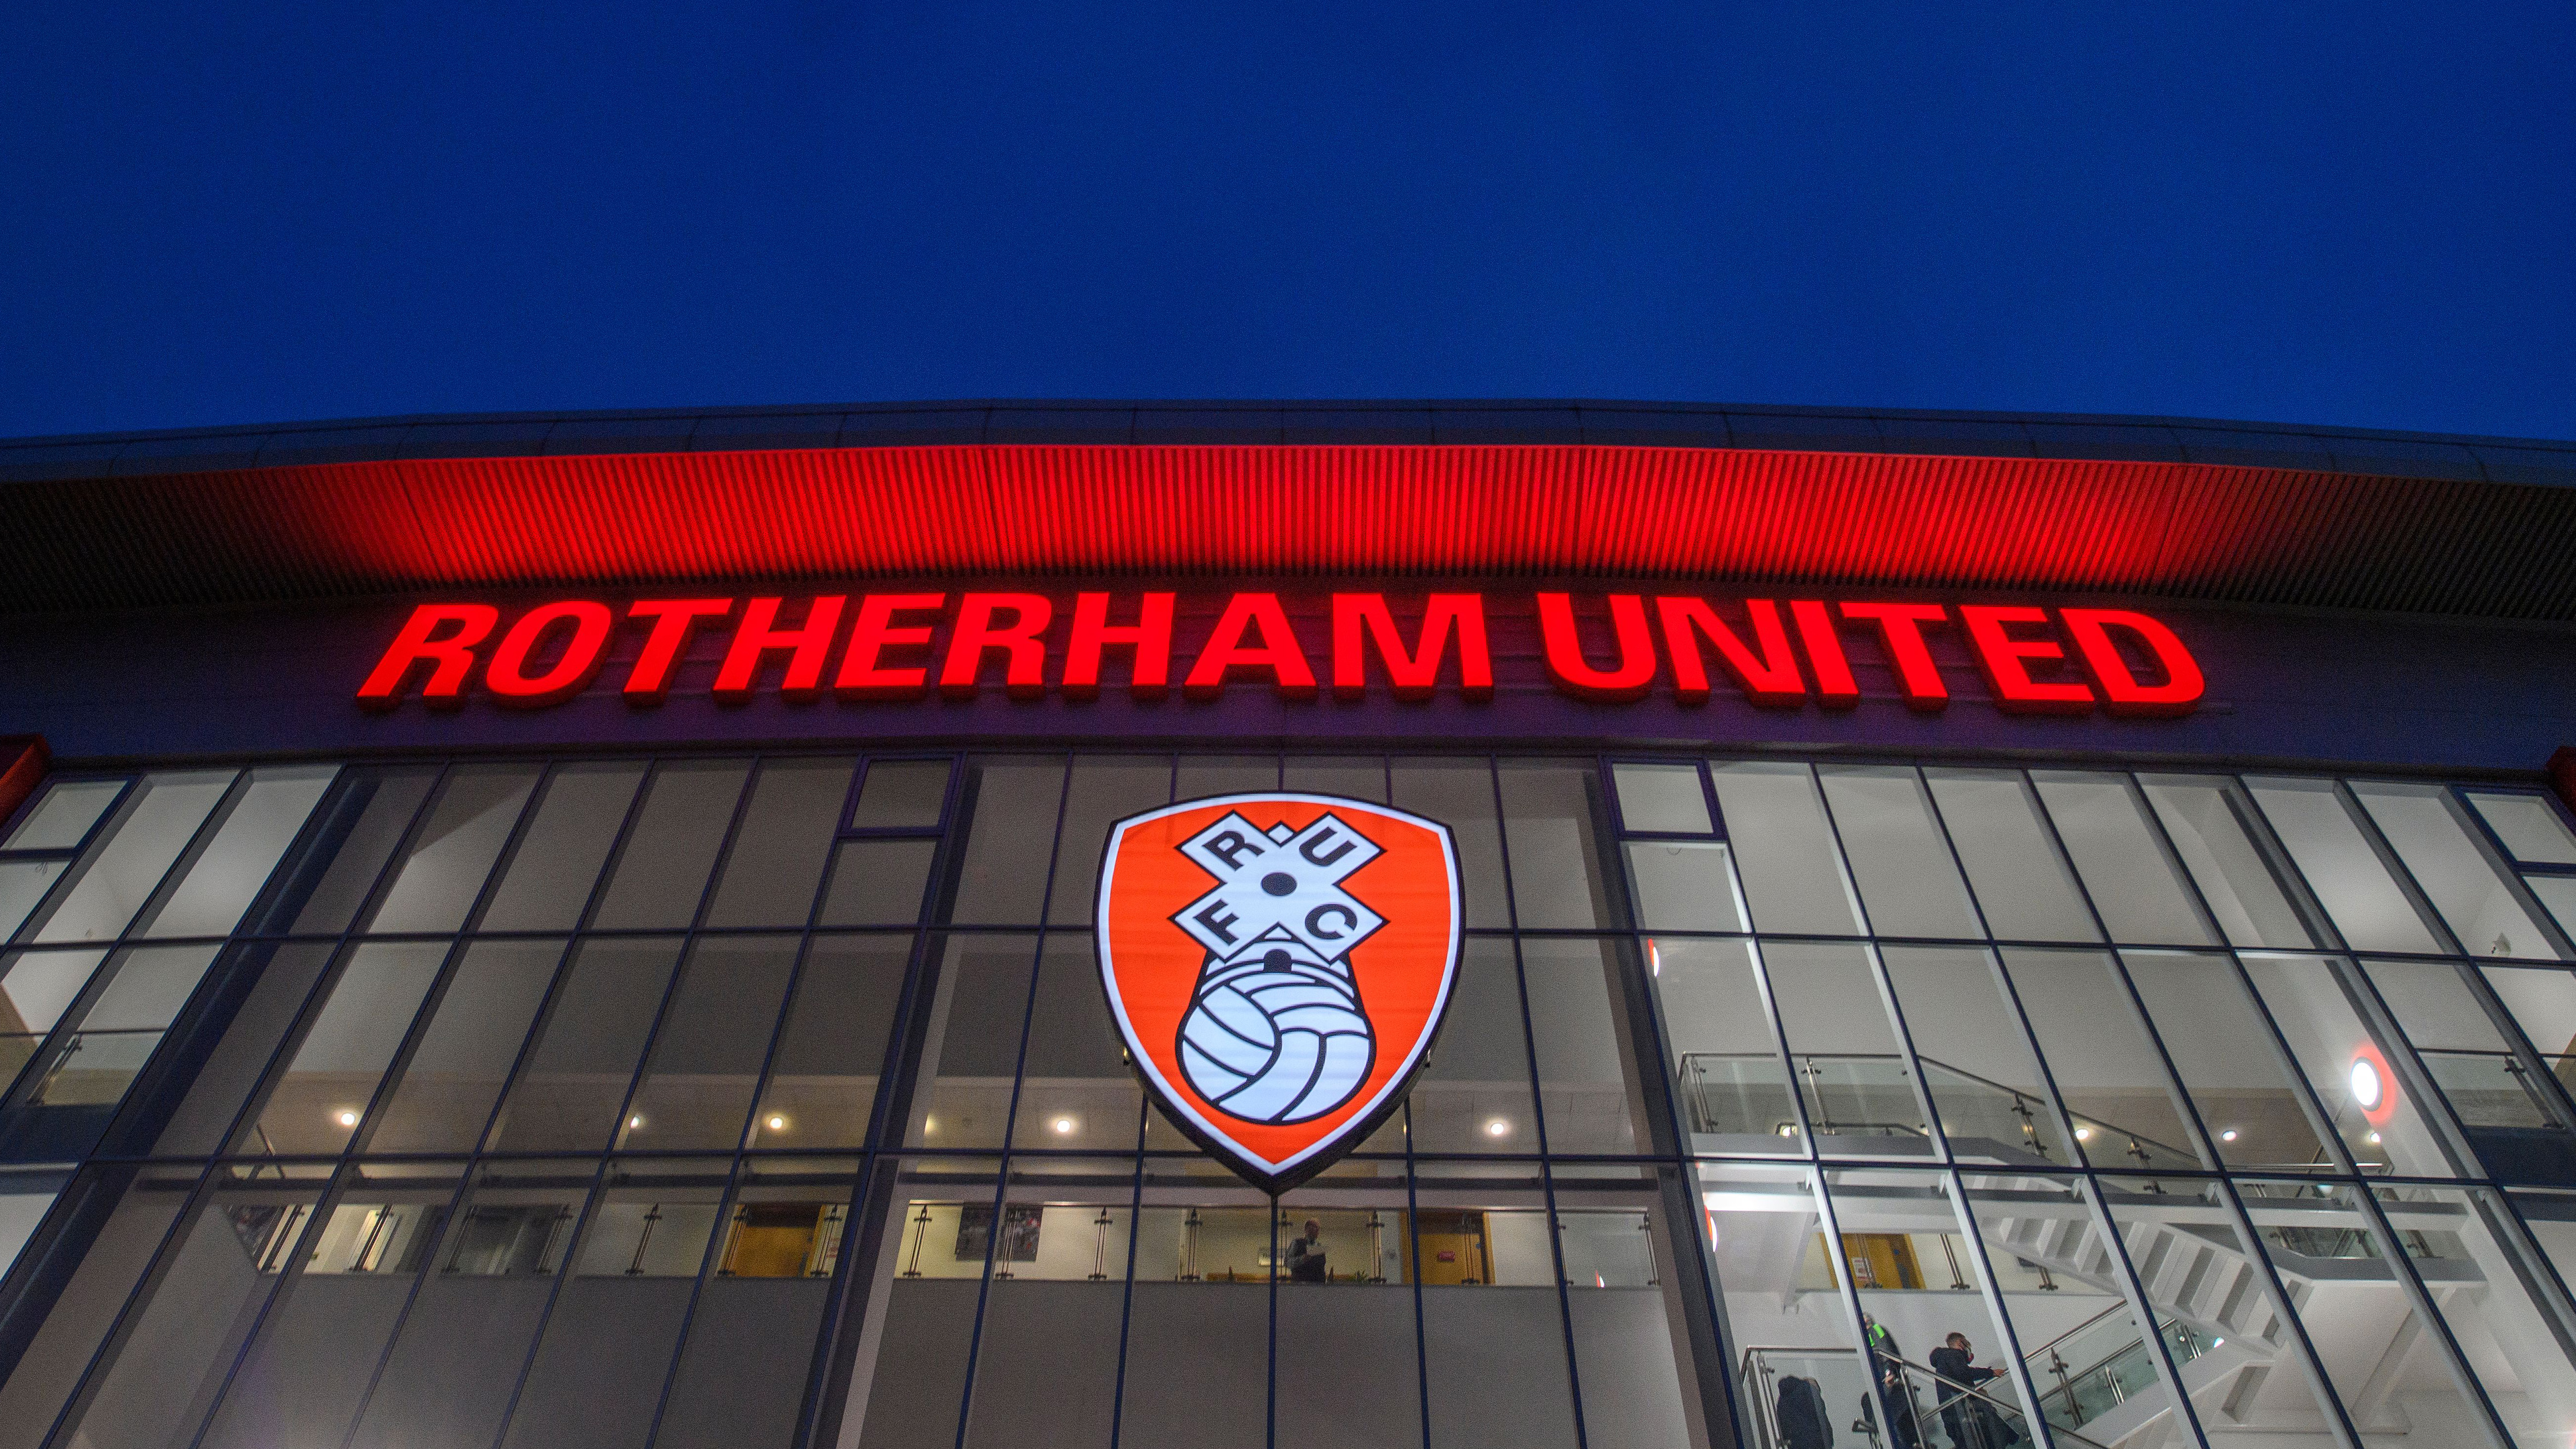 The front of Rotherham United's stadium. It shows the club badge and the club's name above it.